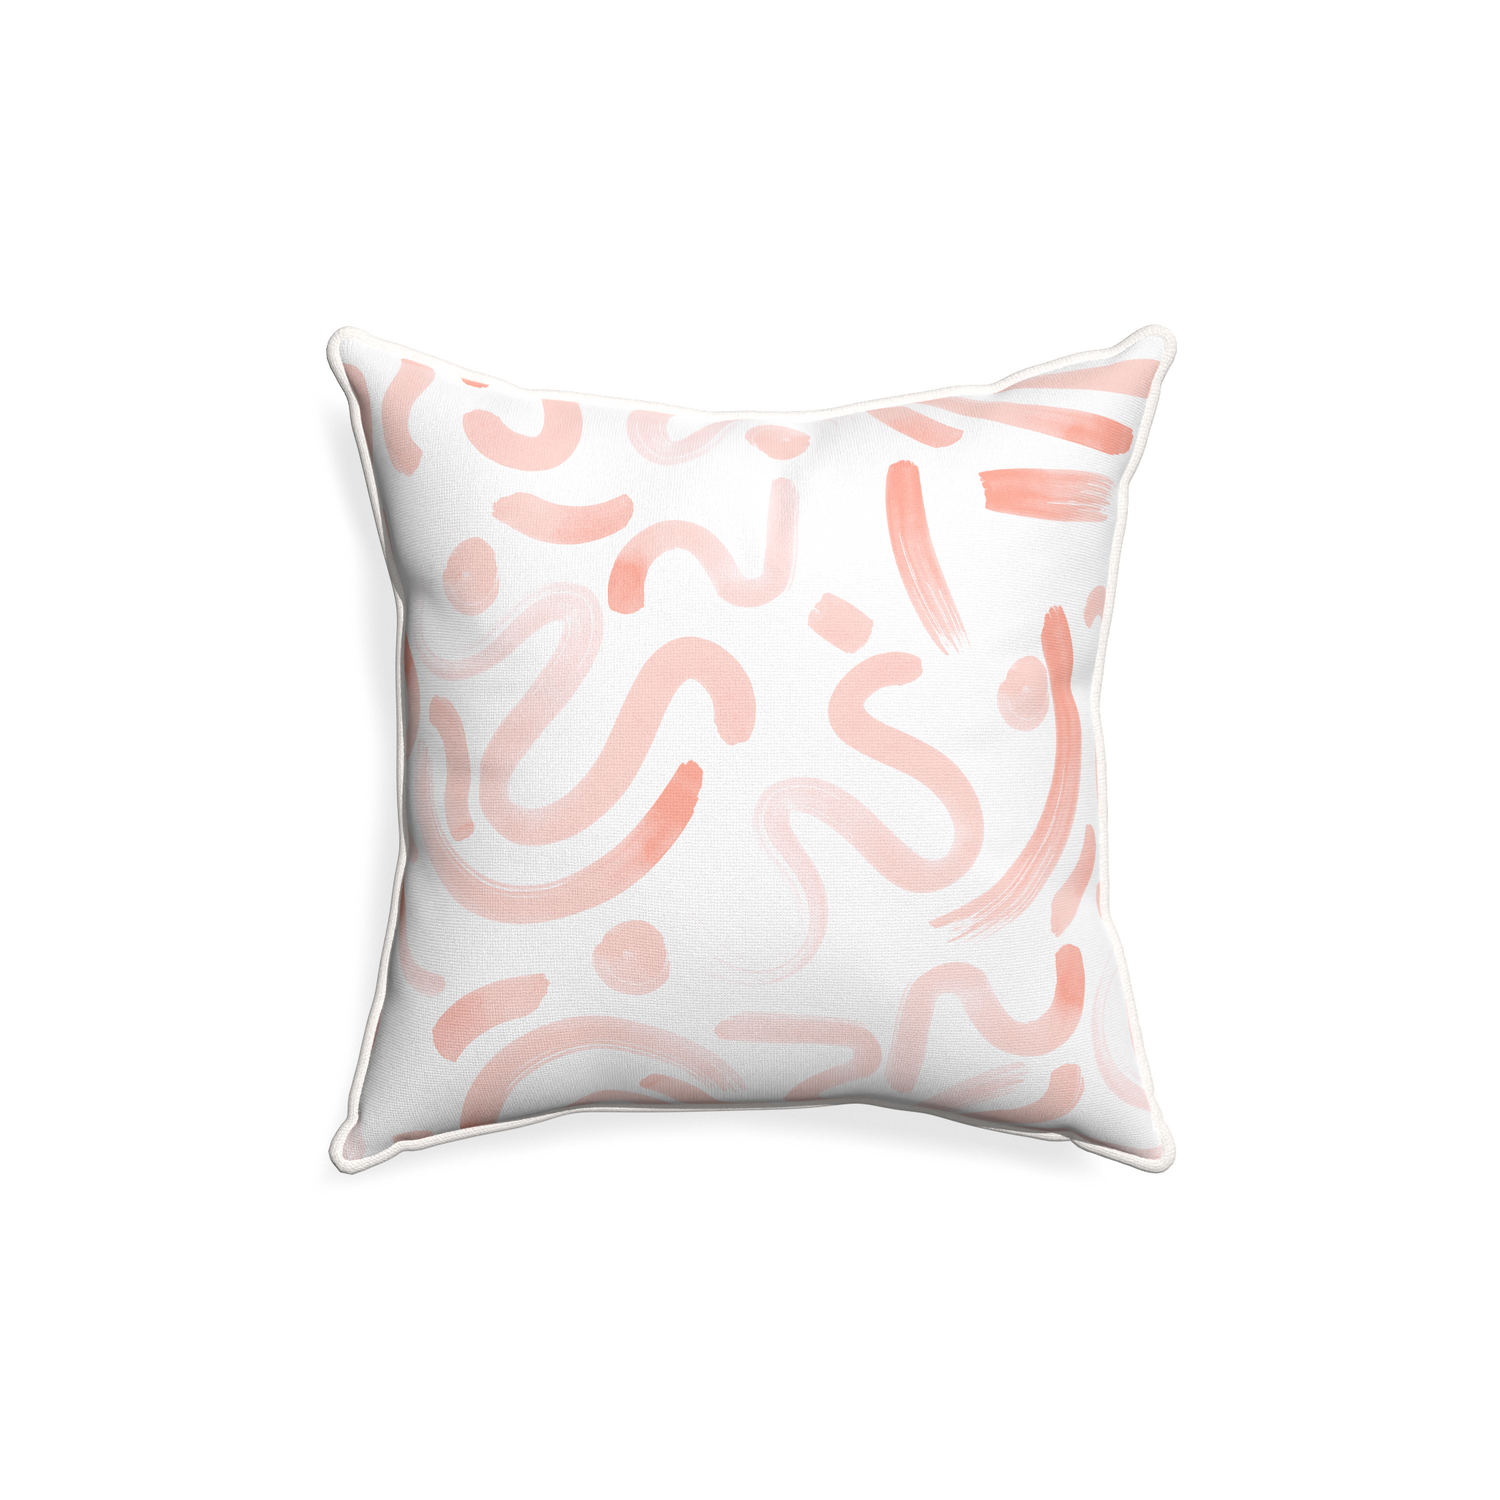 18-square hockney pink custom pink graphicpillow with snow piping on white background